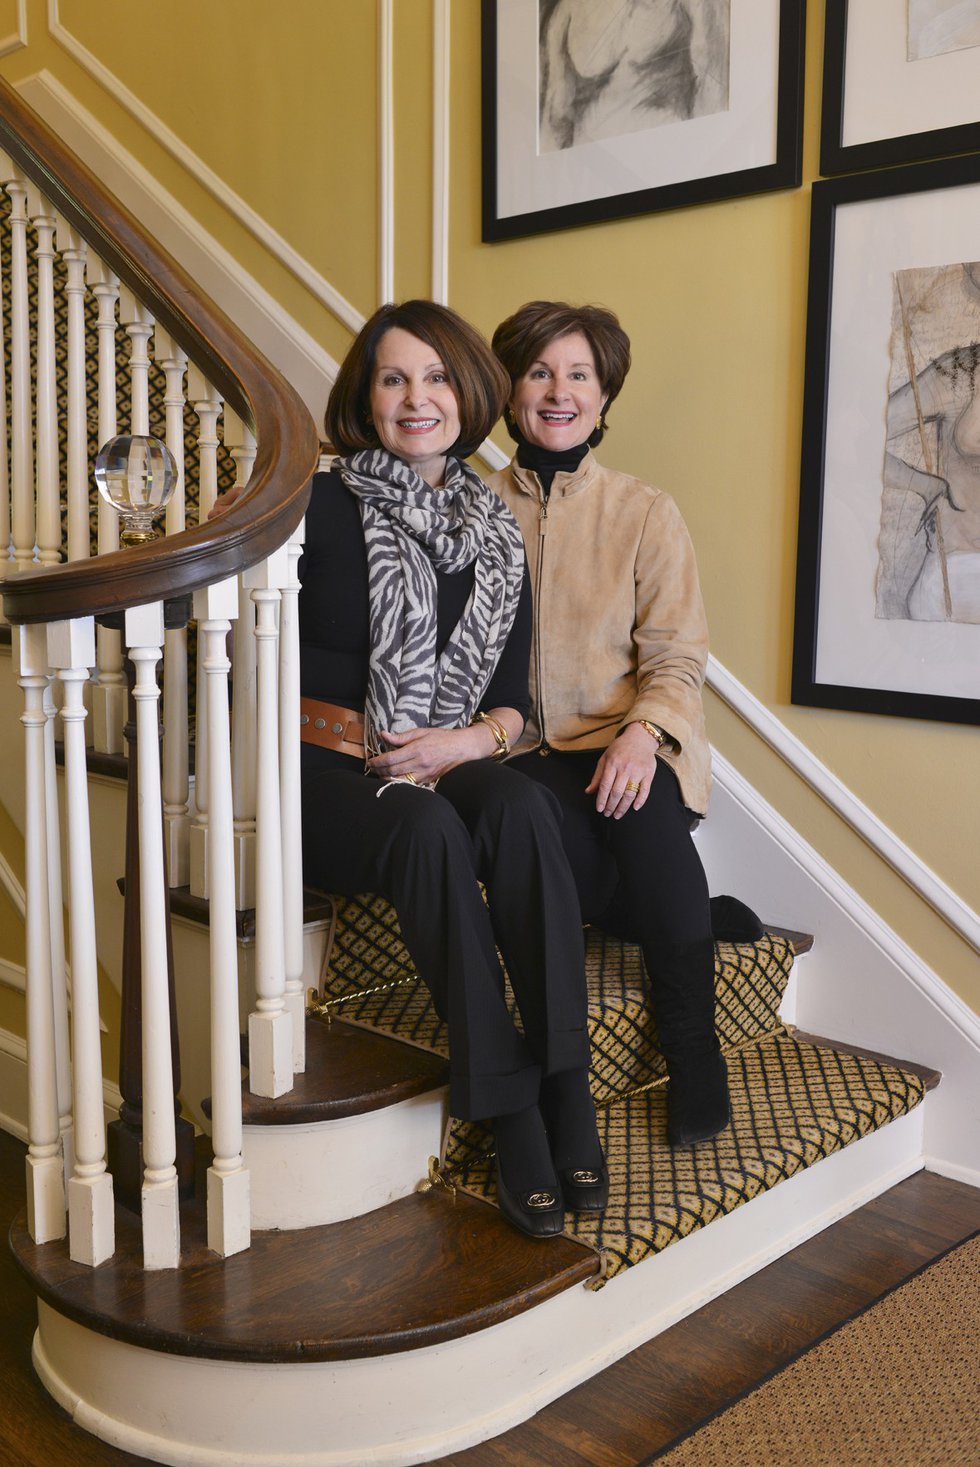 Sisters and business partners Ruthie and Russell pose on the stairs beneath artwork by Bliss Campbell, Ruthie’s daughter, who lives in New York City. 